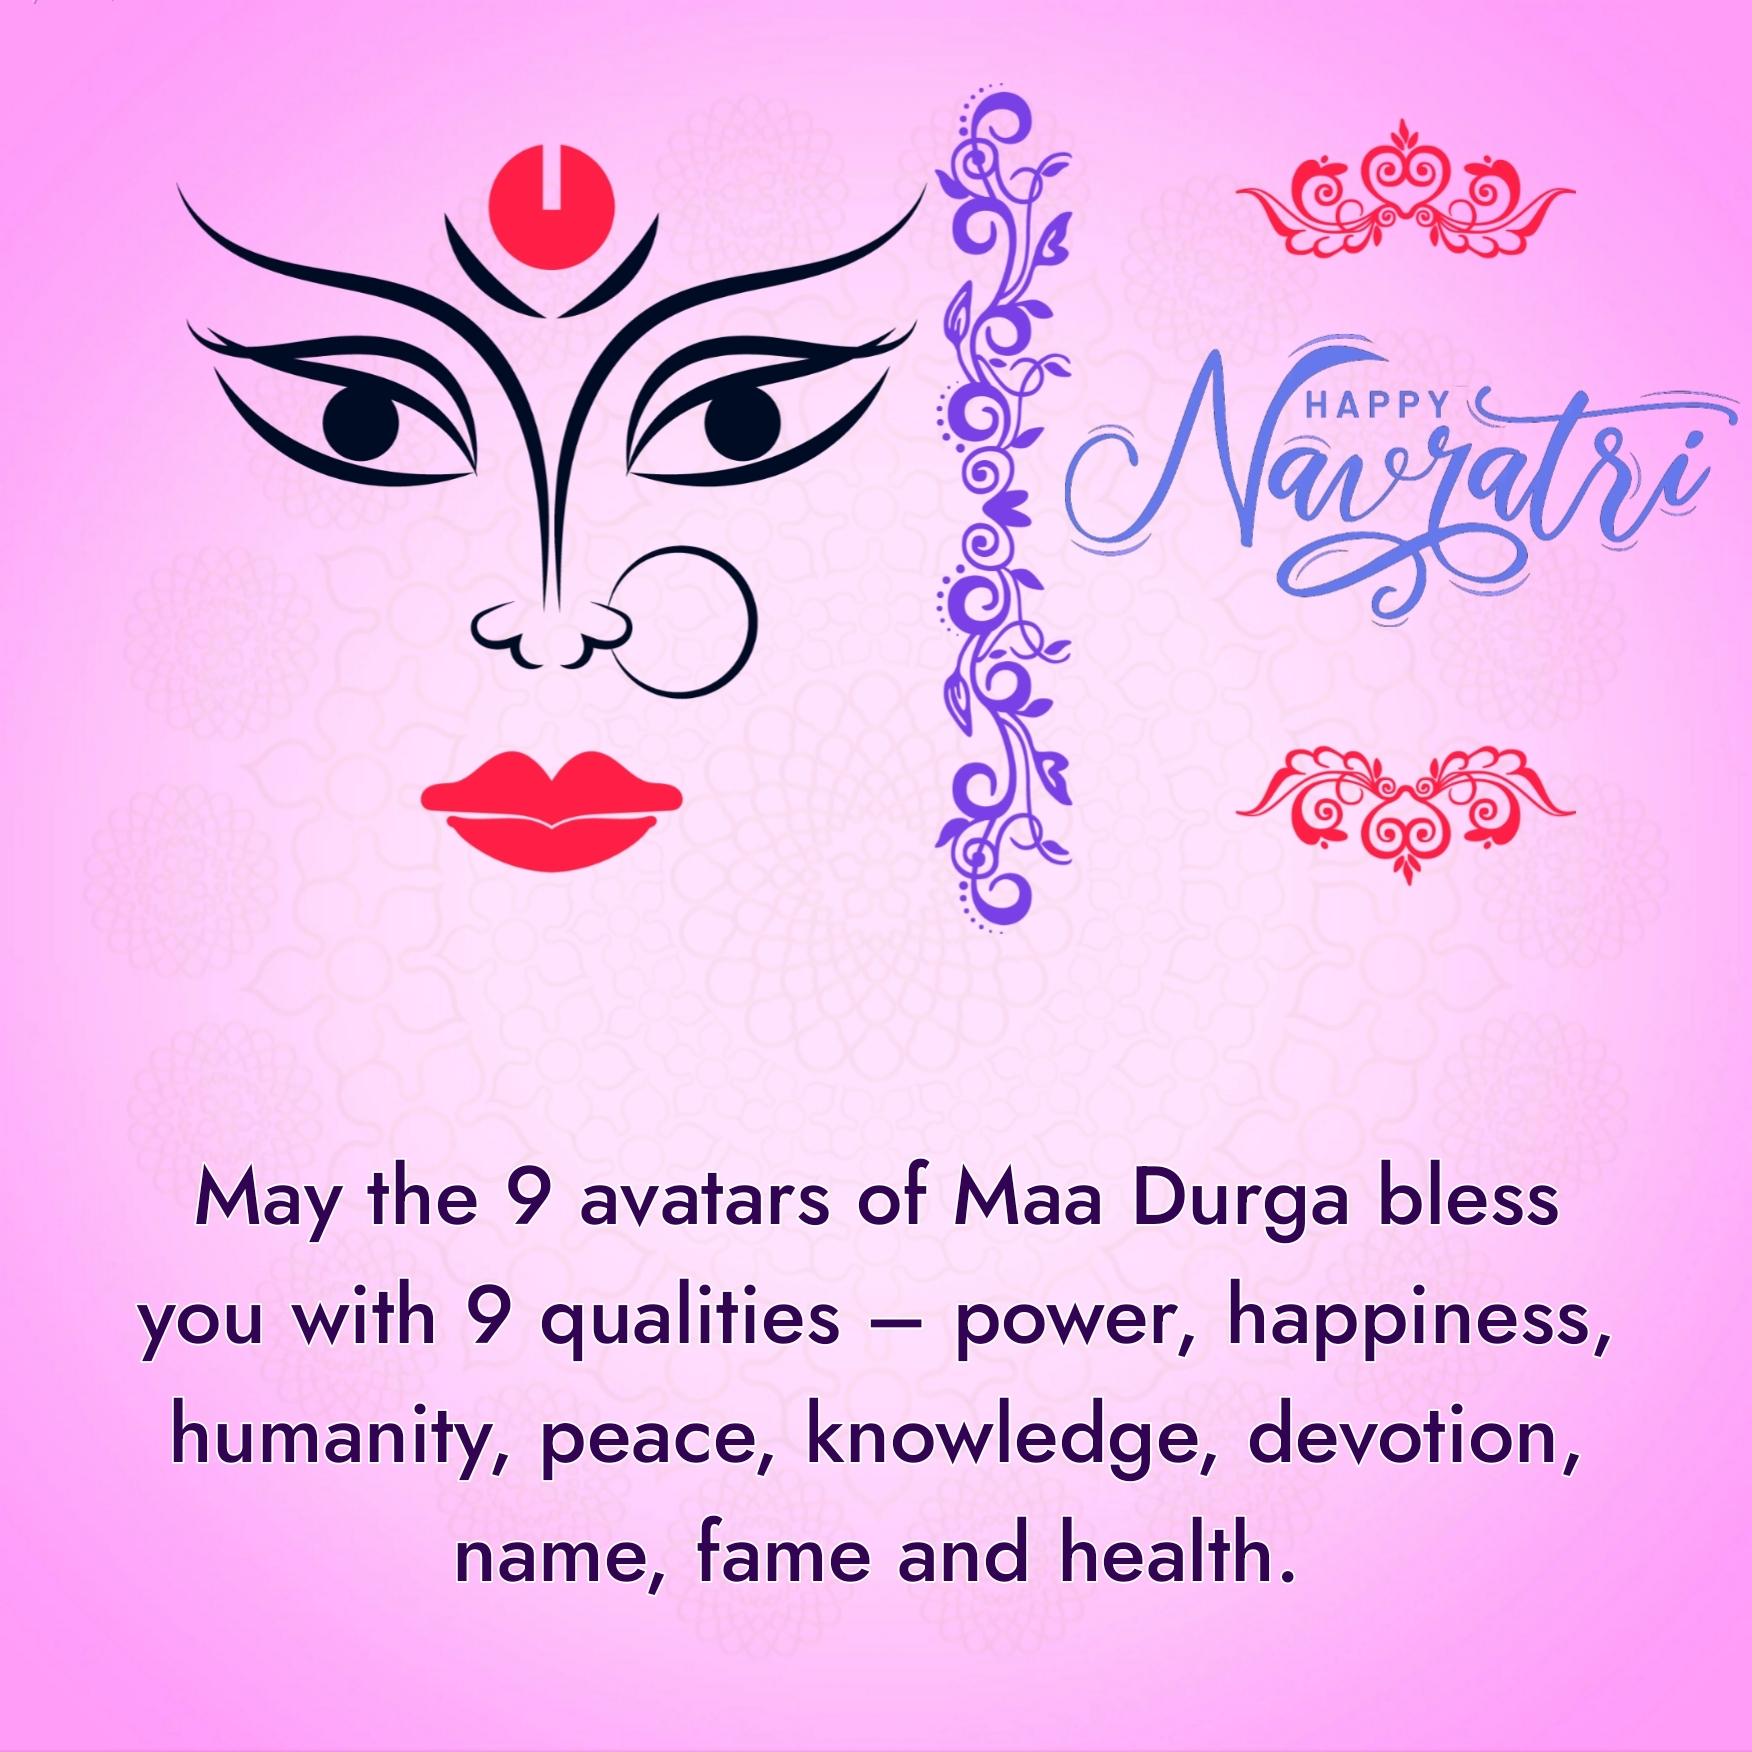 May the 9 avatars of Maa Durga bless you with 9 qualities